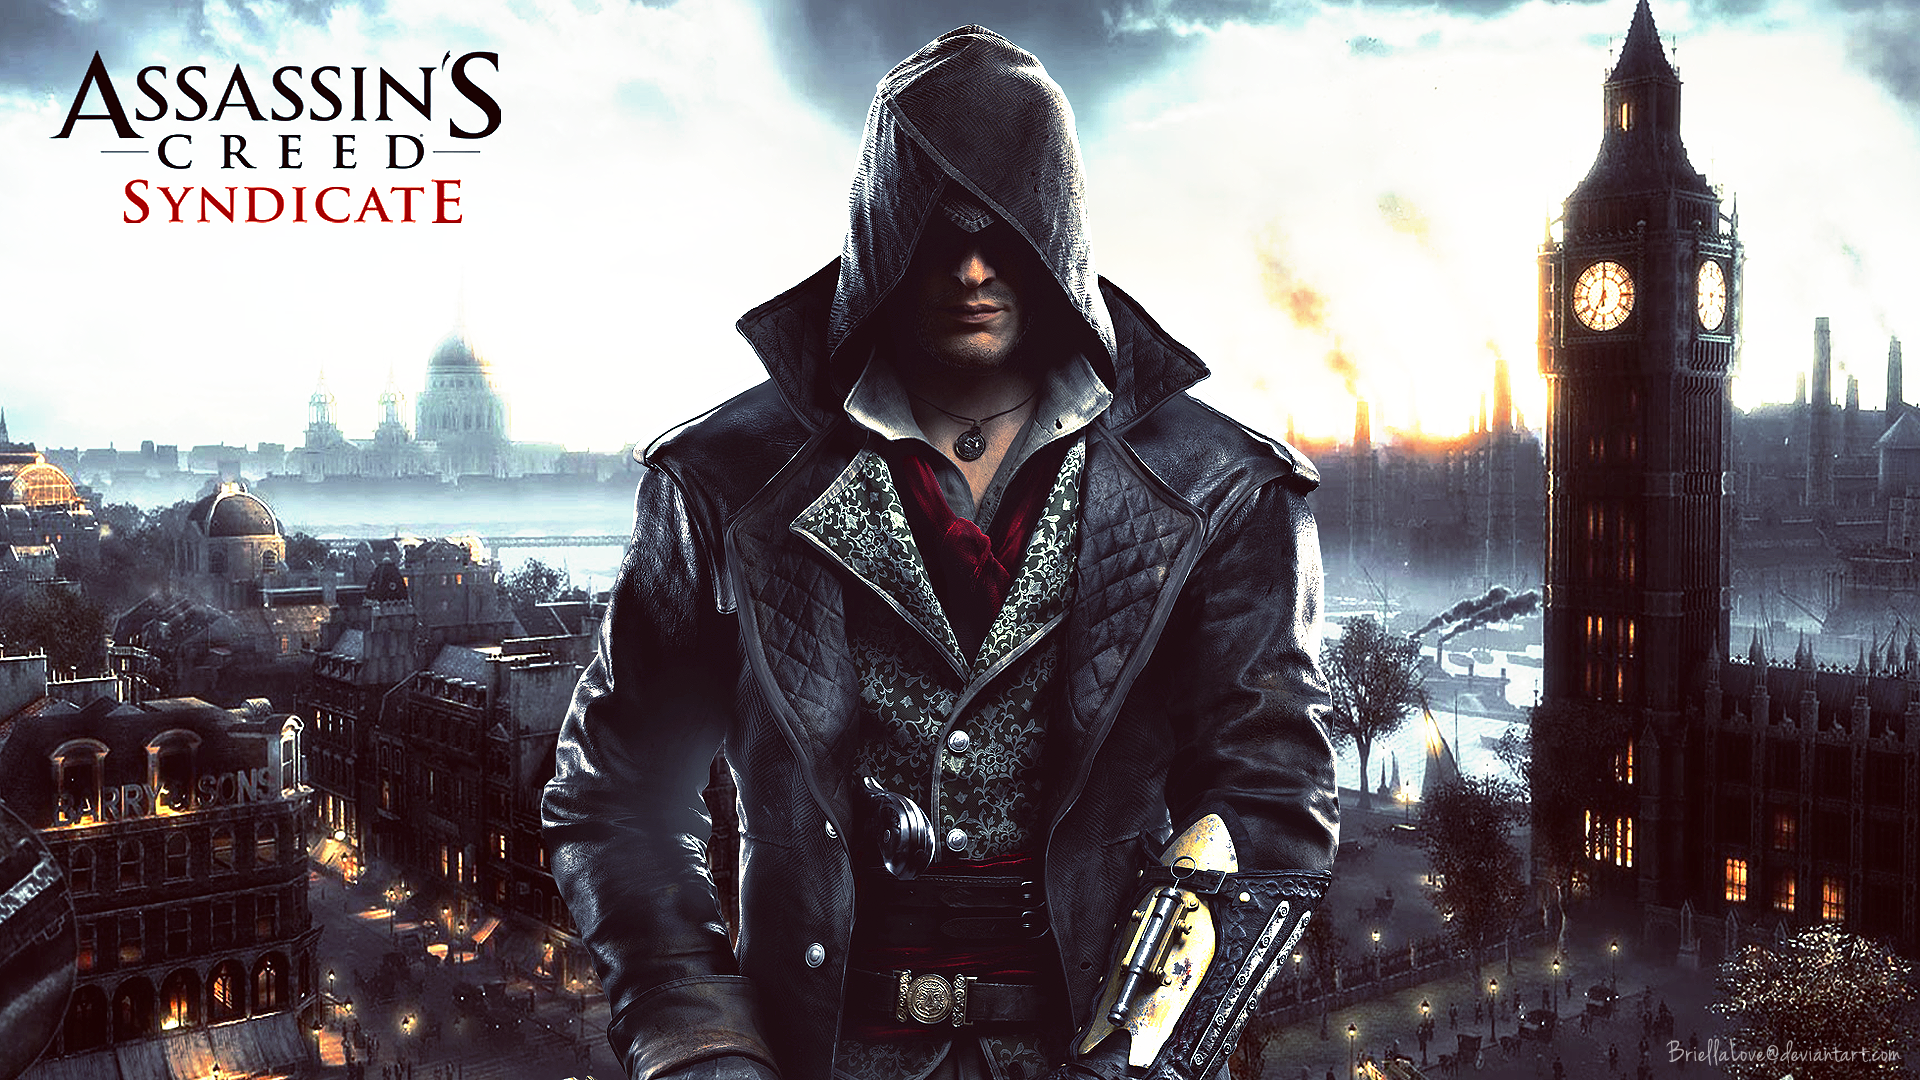 Assassin Creed Syndicate release date